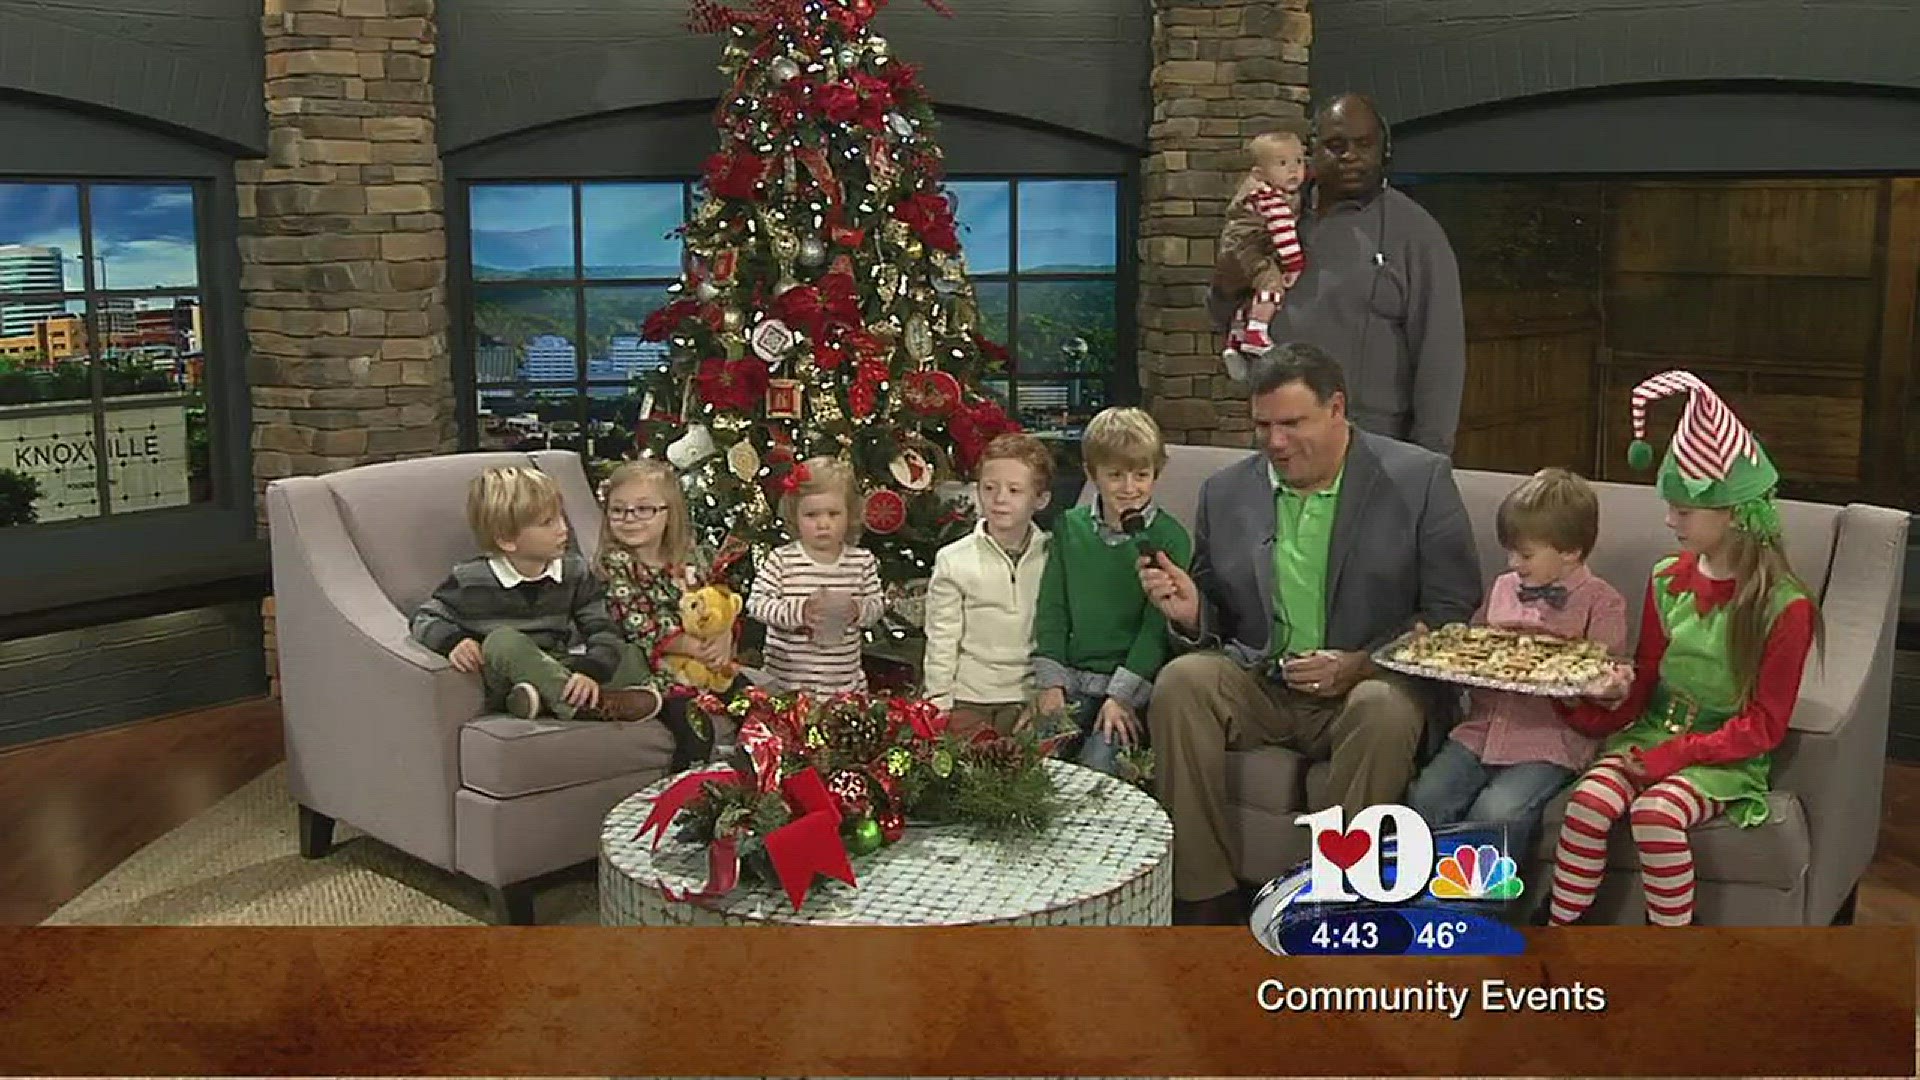 December 13, 2016Live at Five at 4Children of the WBIR Channel 10 sales staff deliver cookies to Live at Five at 4.